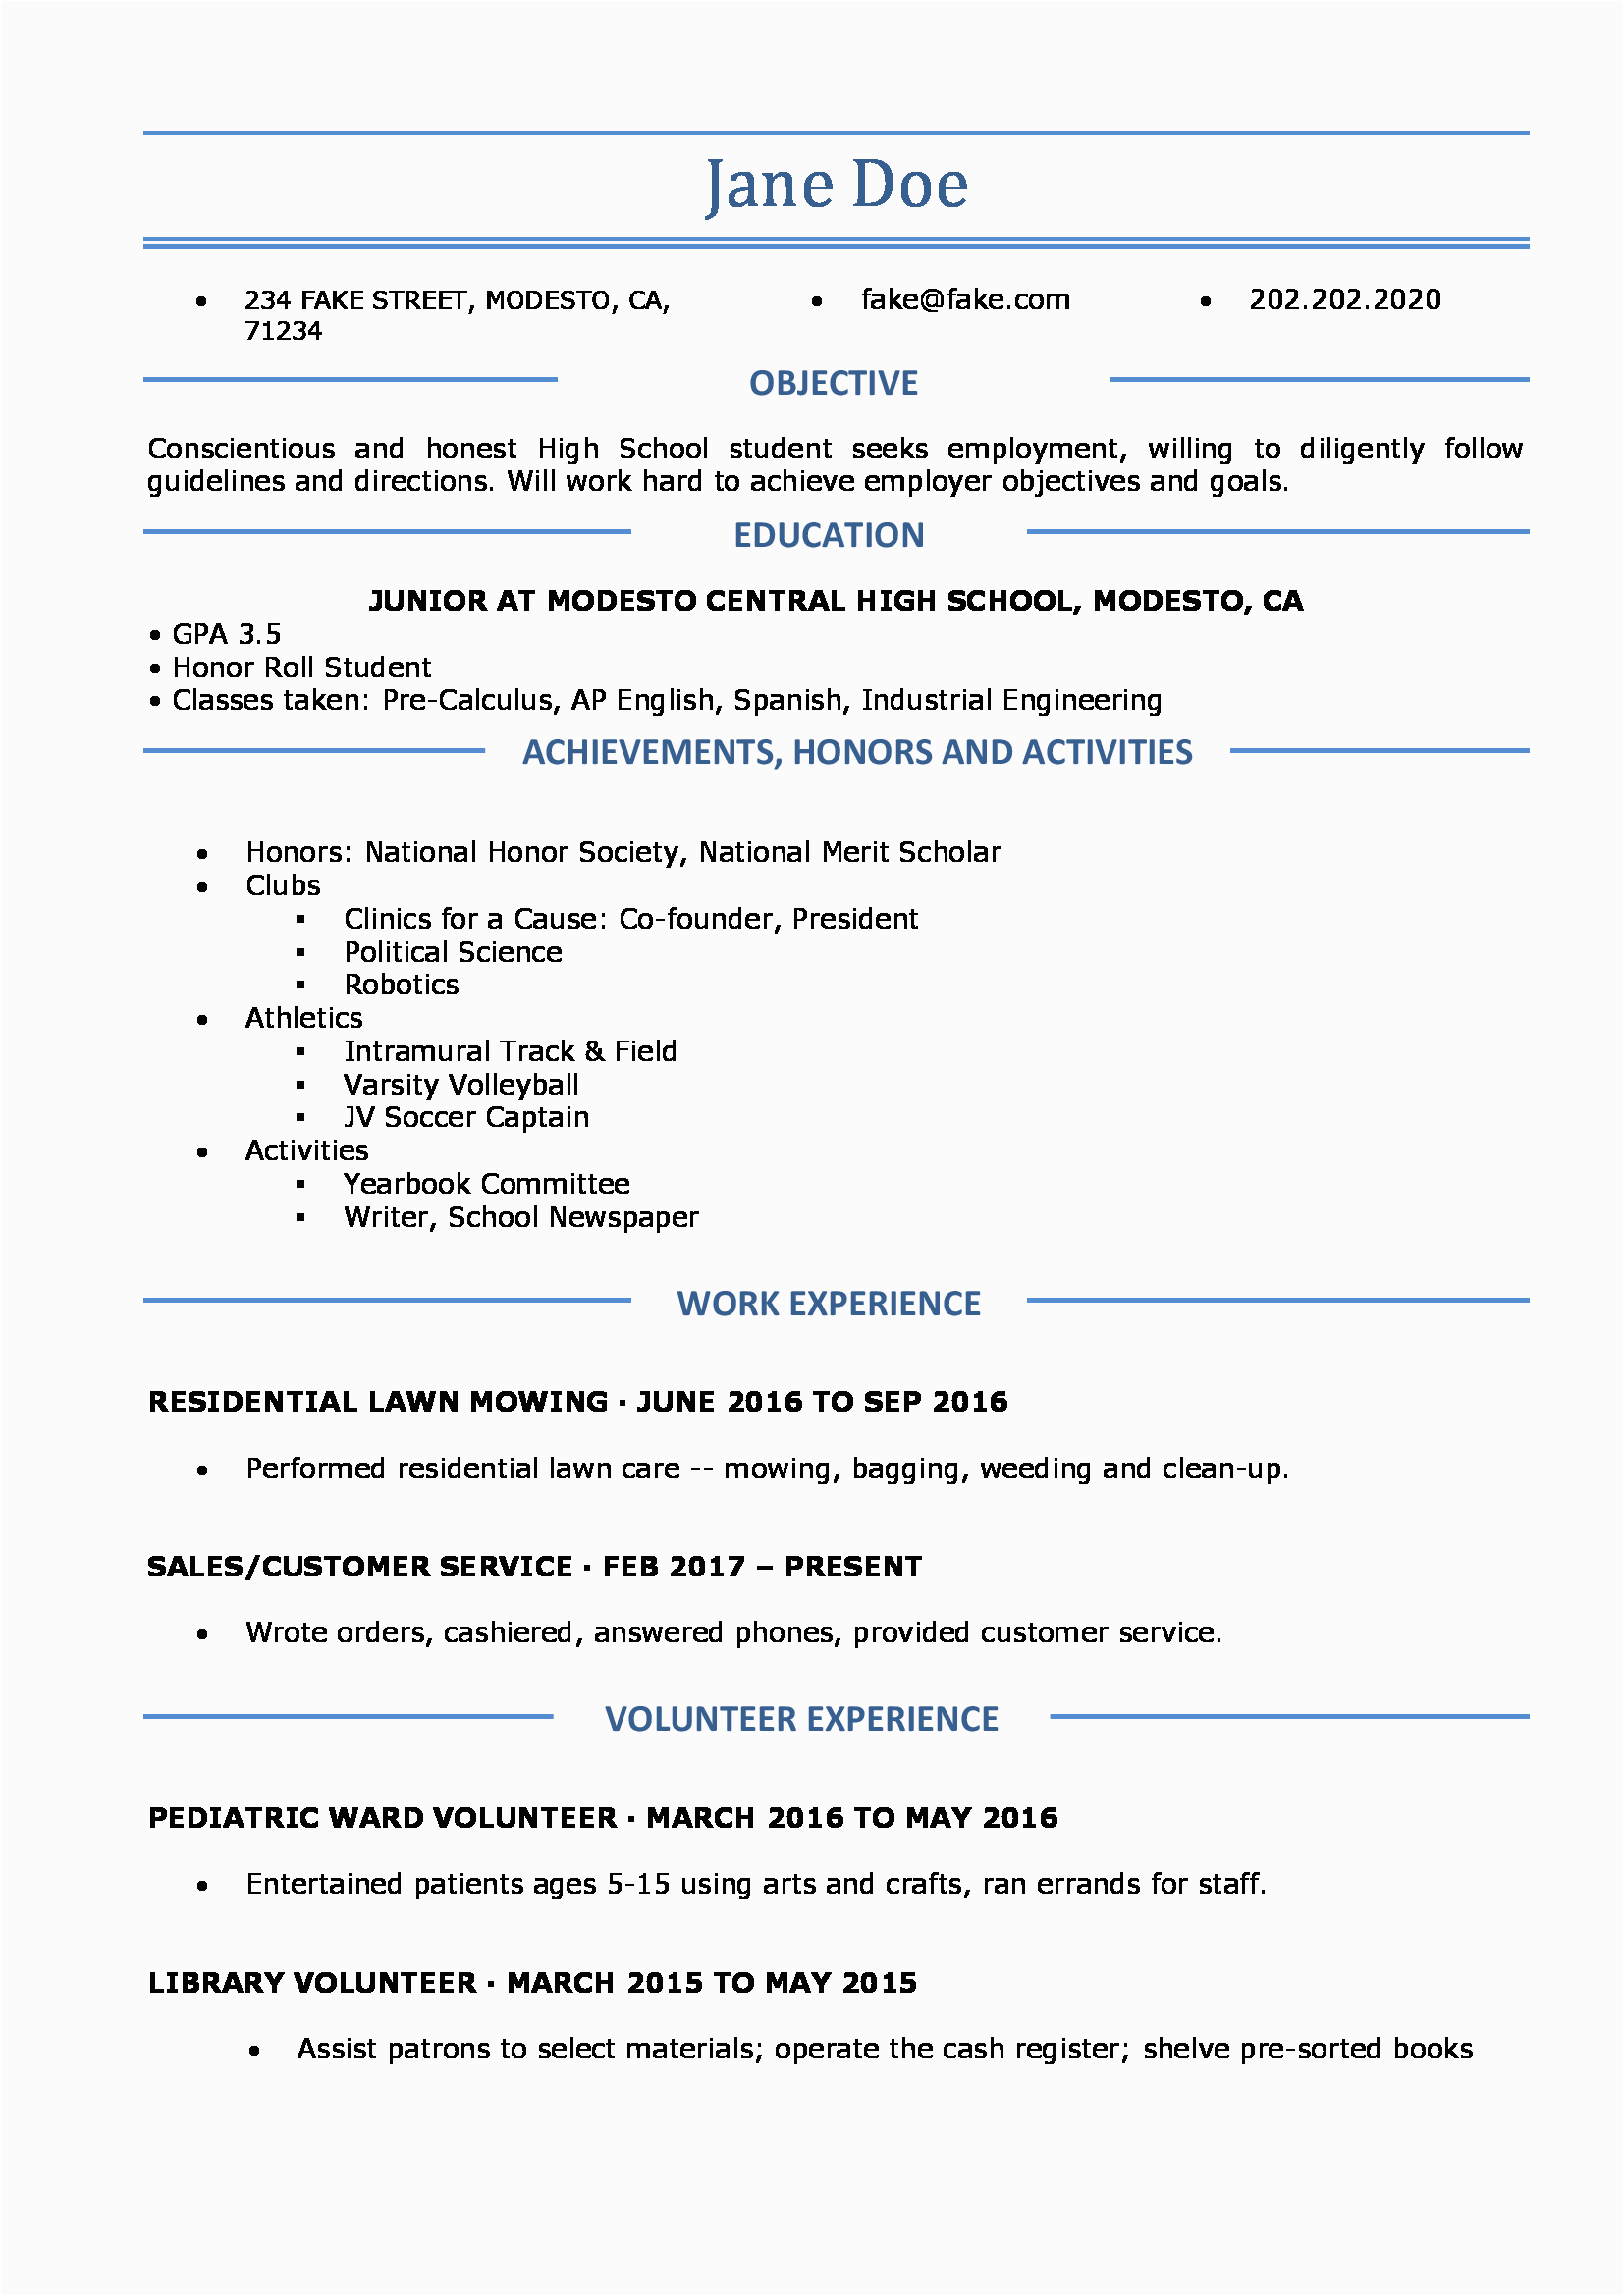 Sample Resume From A High School Student High School Resume Resumes Perfect for High School Students